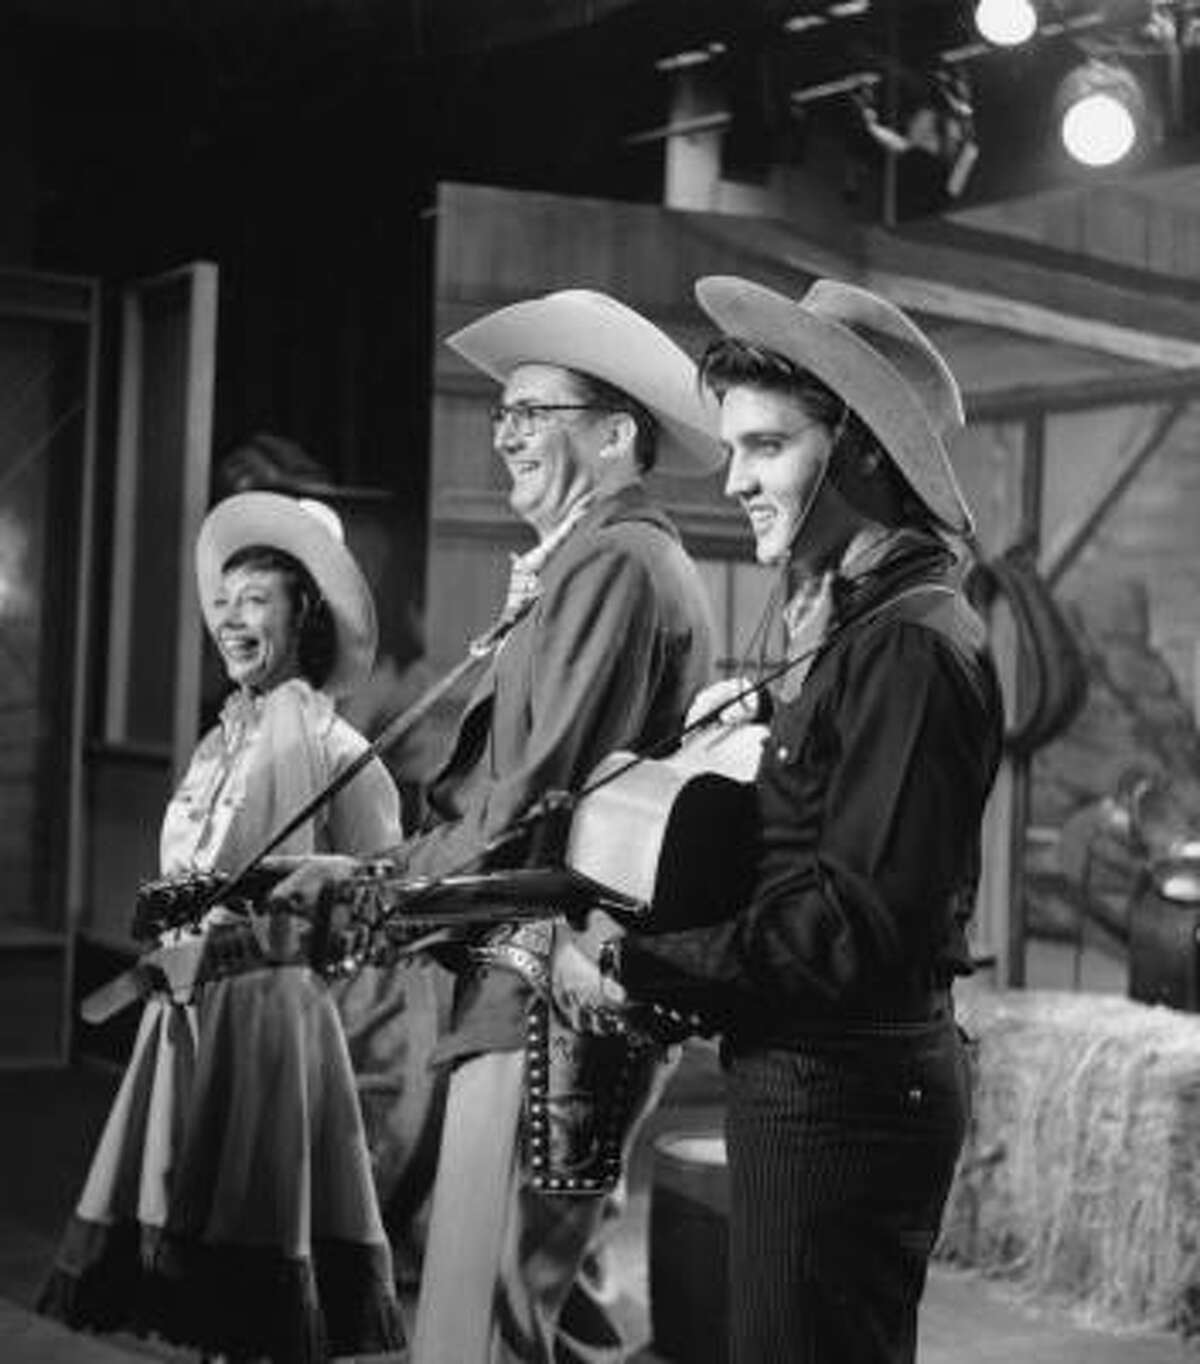 Elvis Presley is shown performing on the television program The Steve Allen Show in this July 1956 photo. At center is Steve Allen and to his right is Imogene Coca.